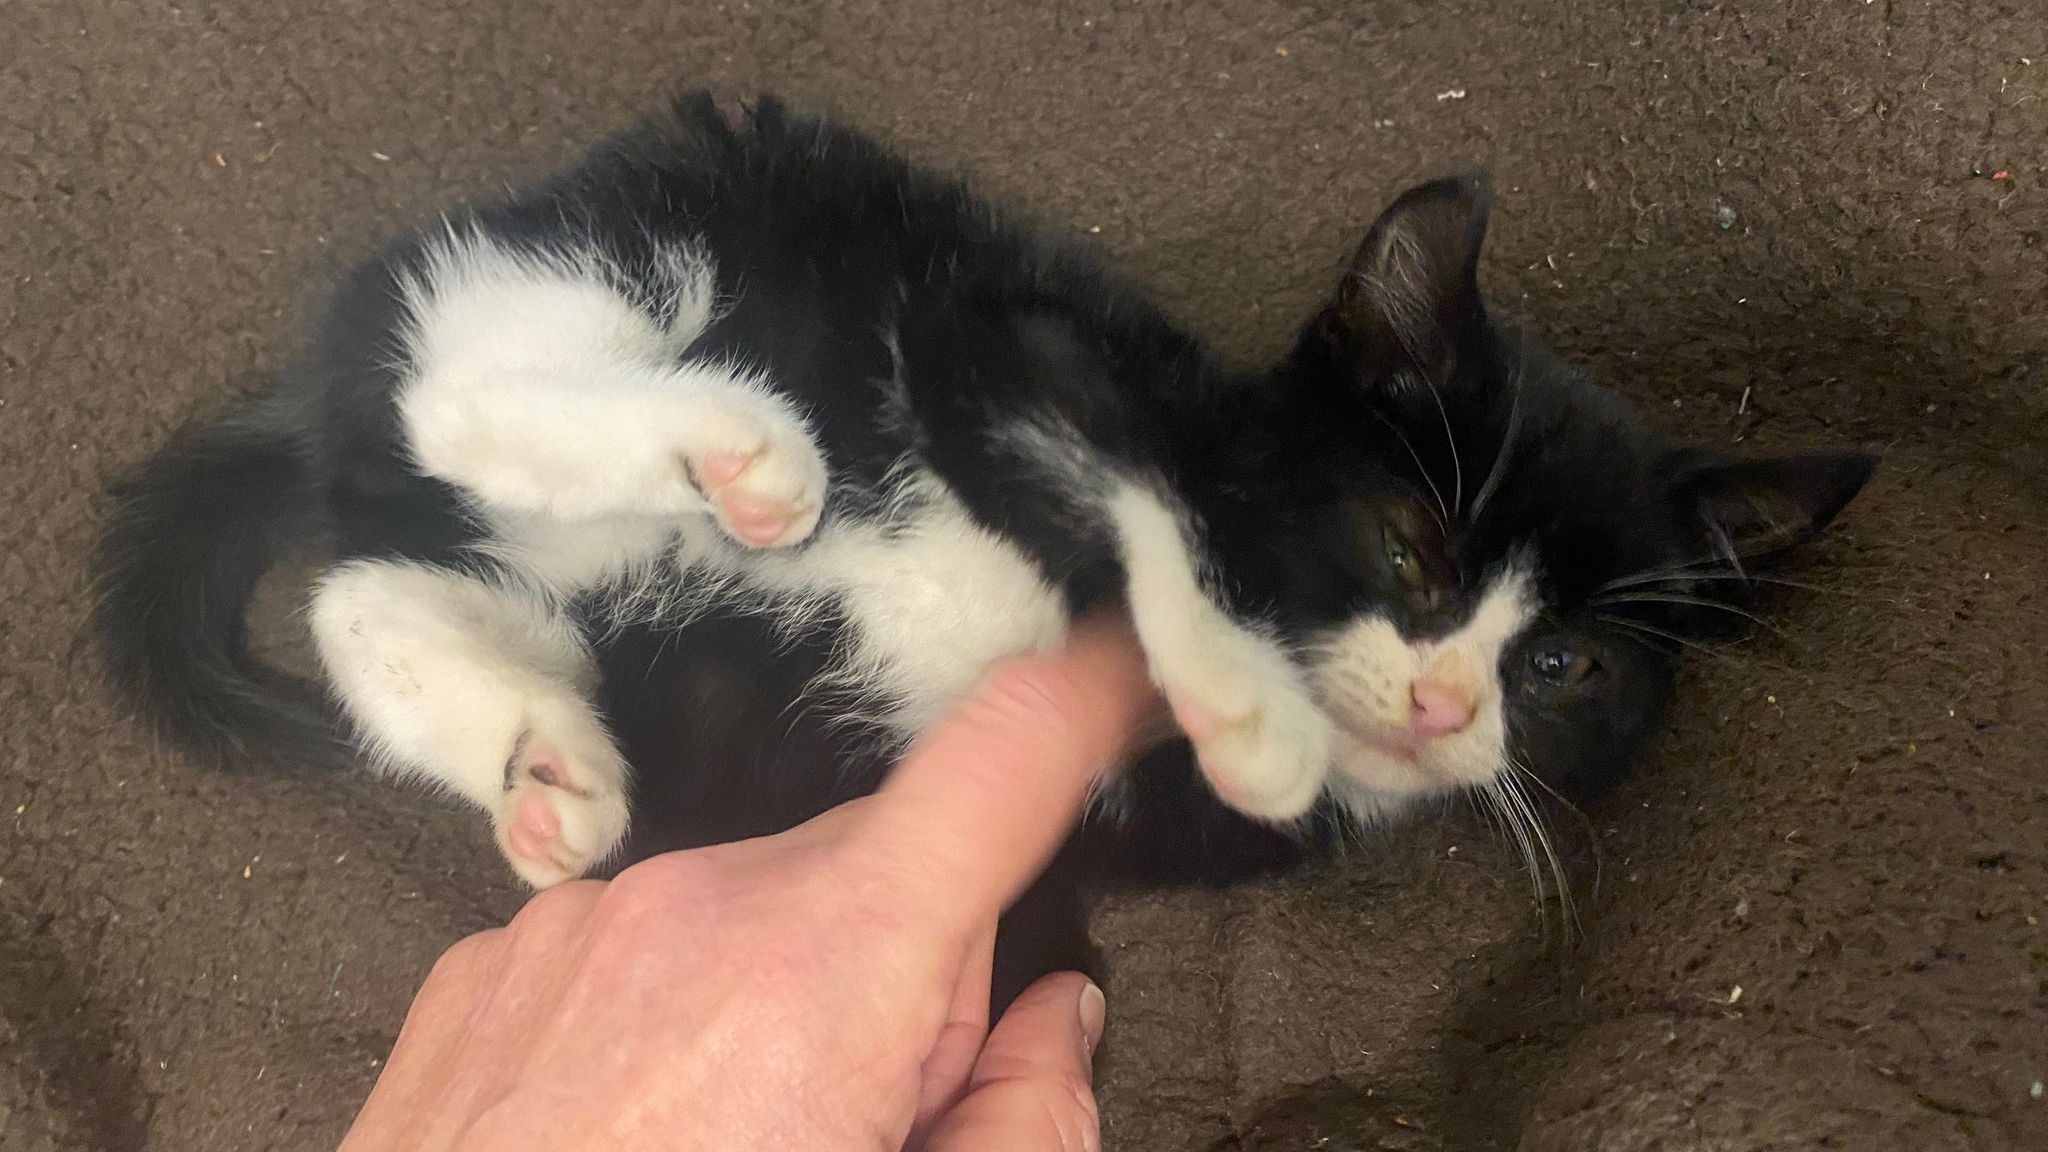 Kitten Survives 250 Mile Journey From Southampton To Merseyside In The 